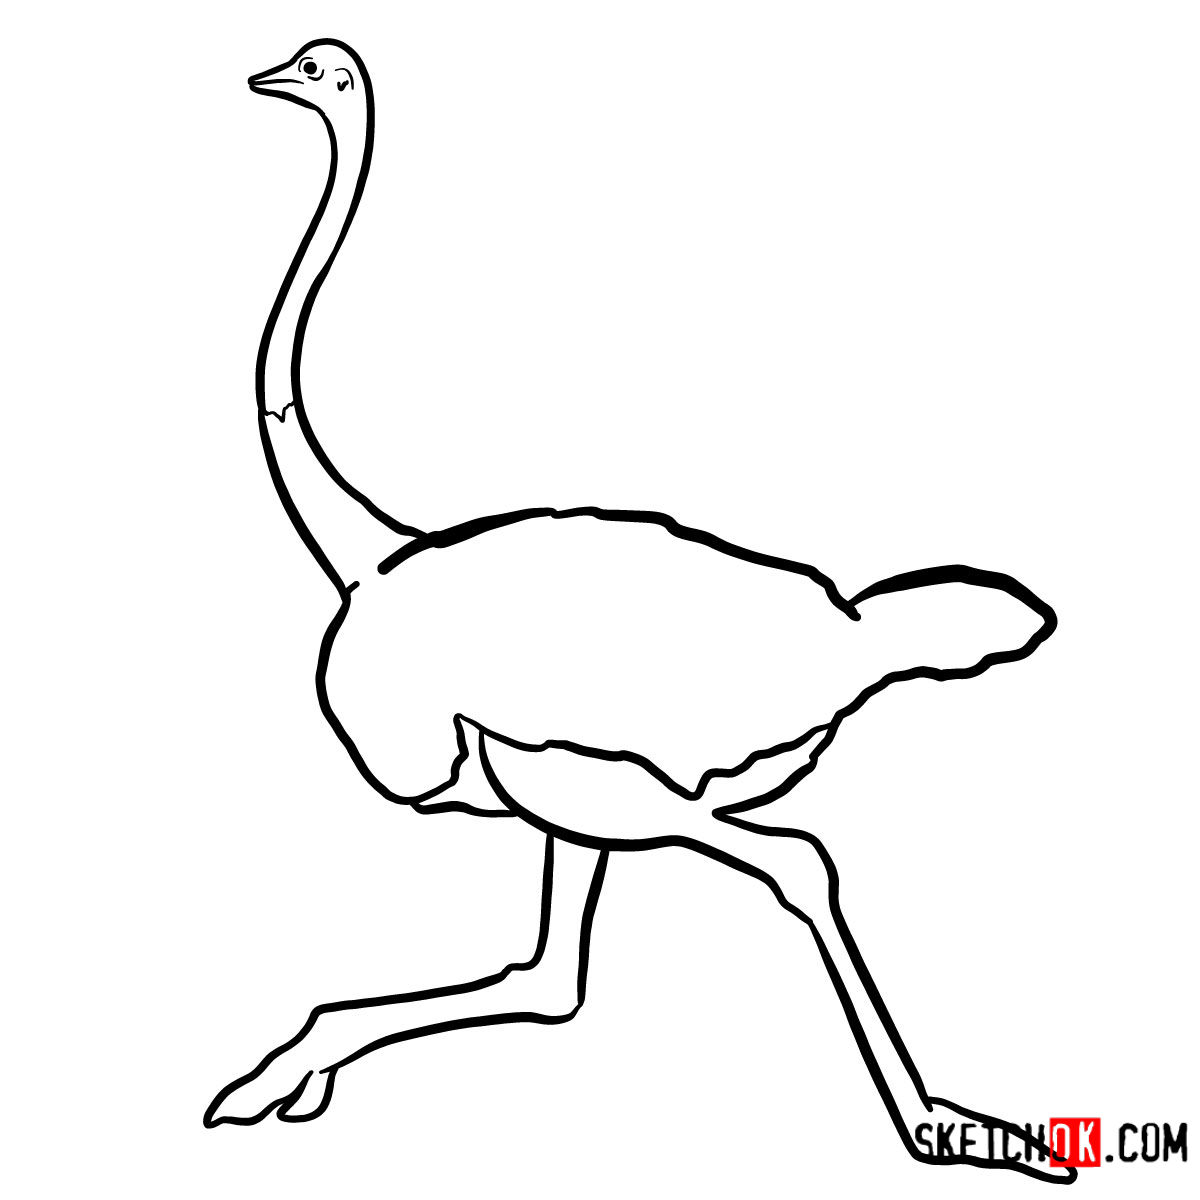 How to draw an Ostrich